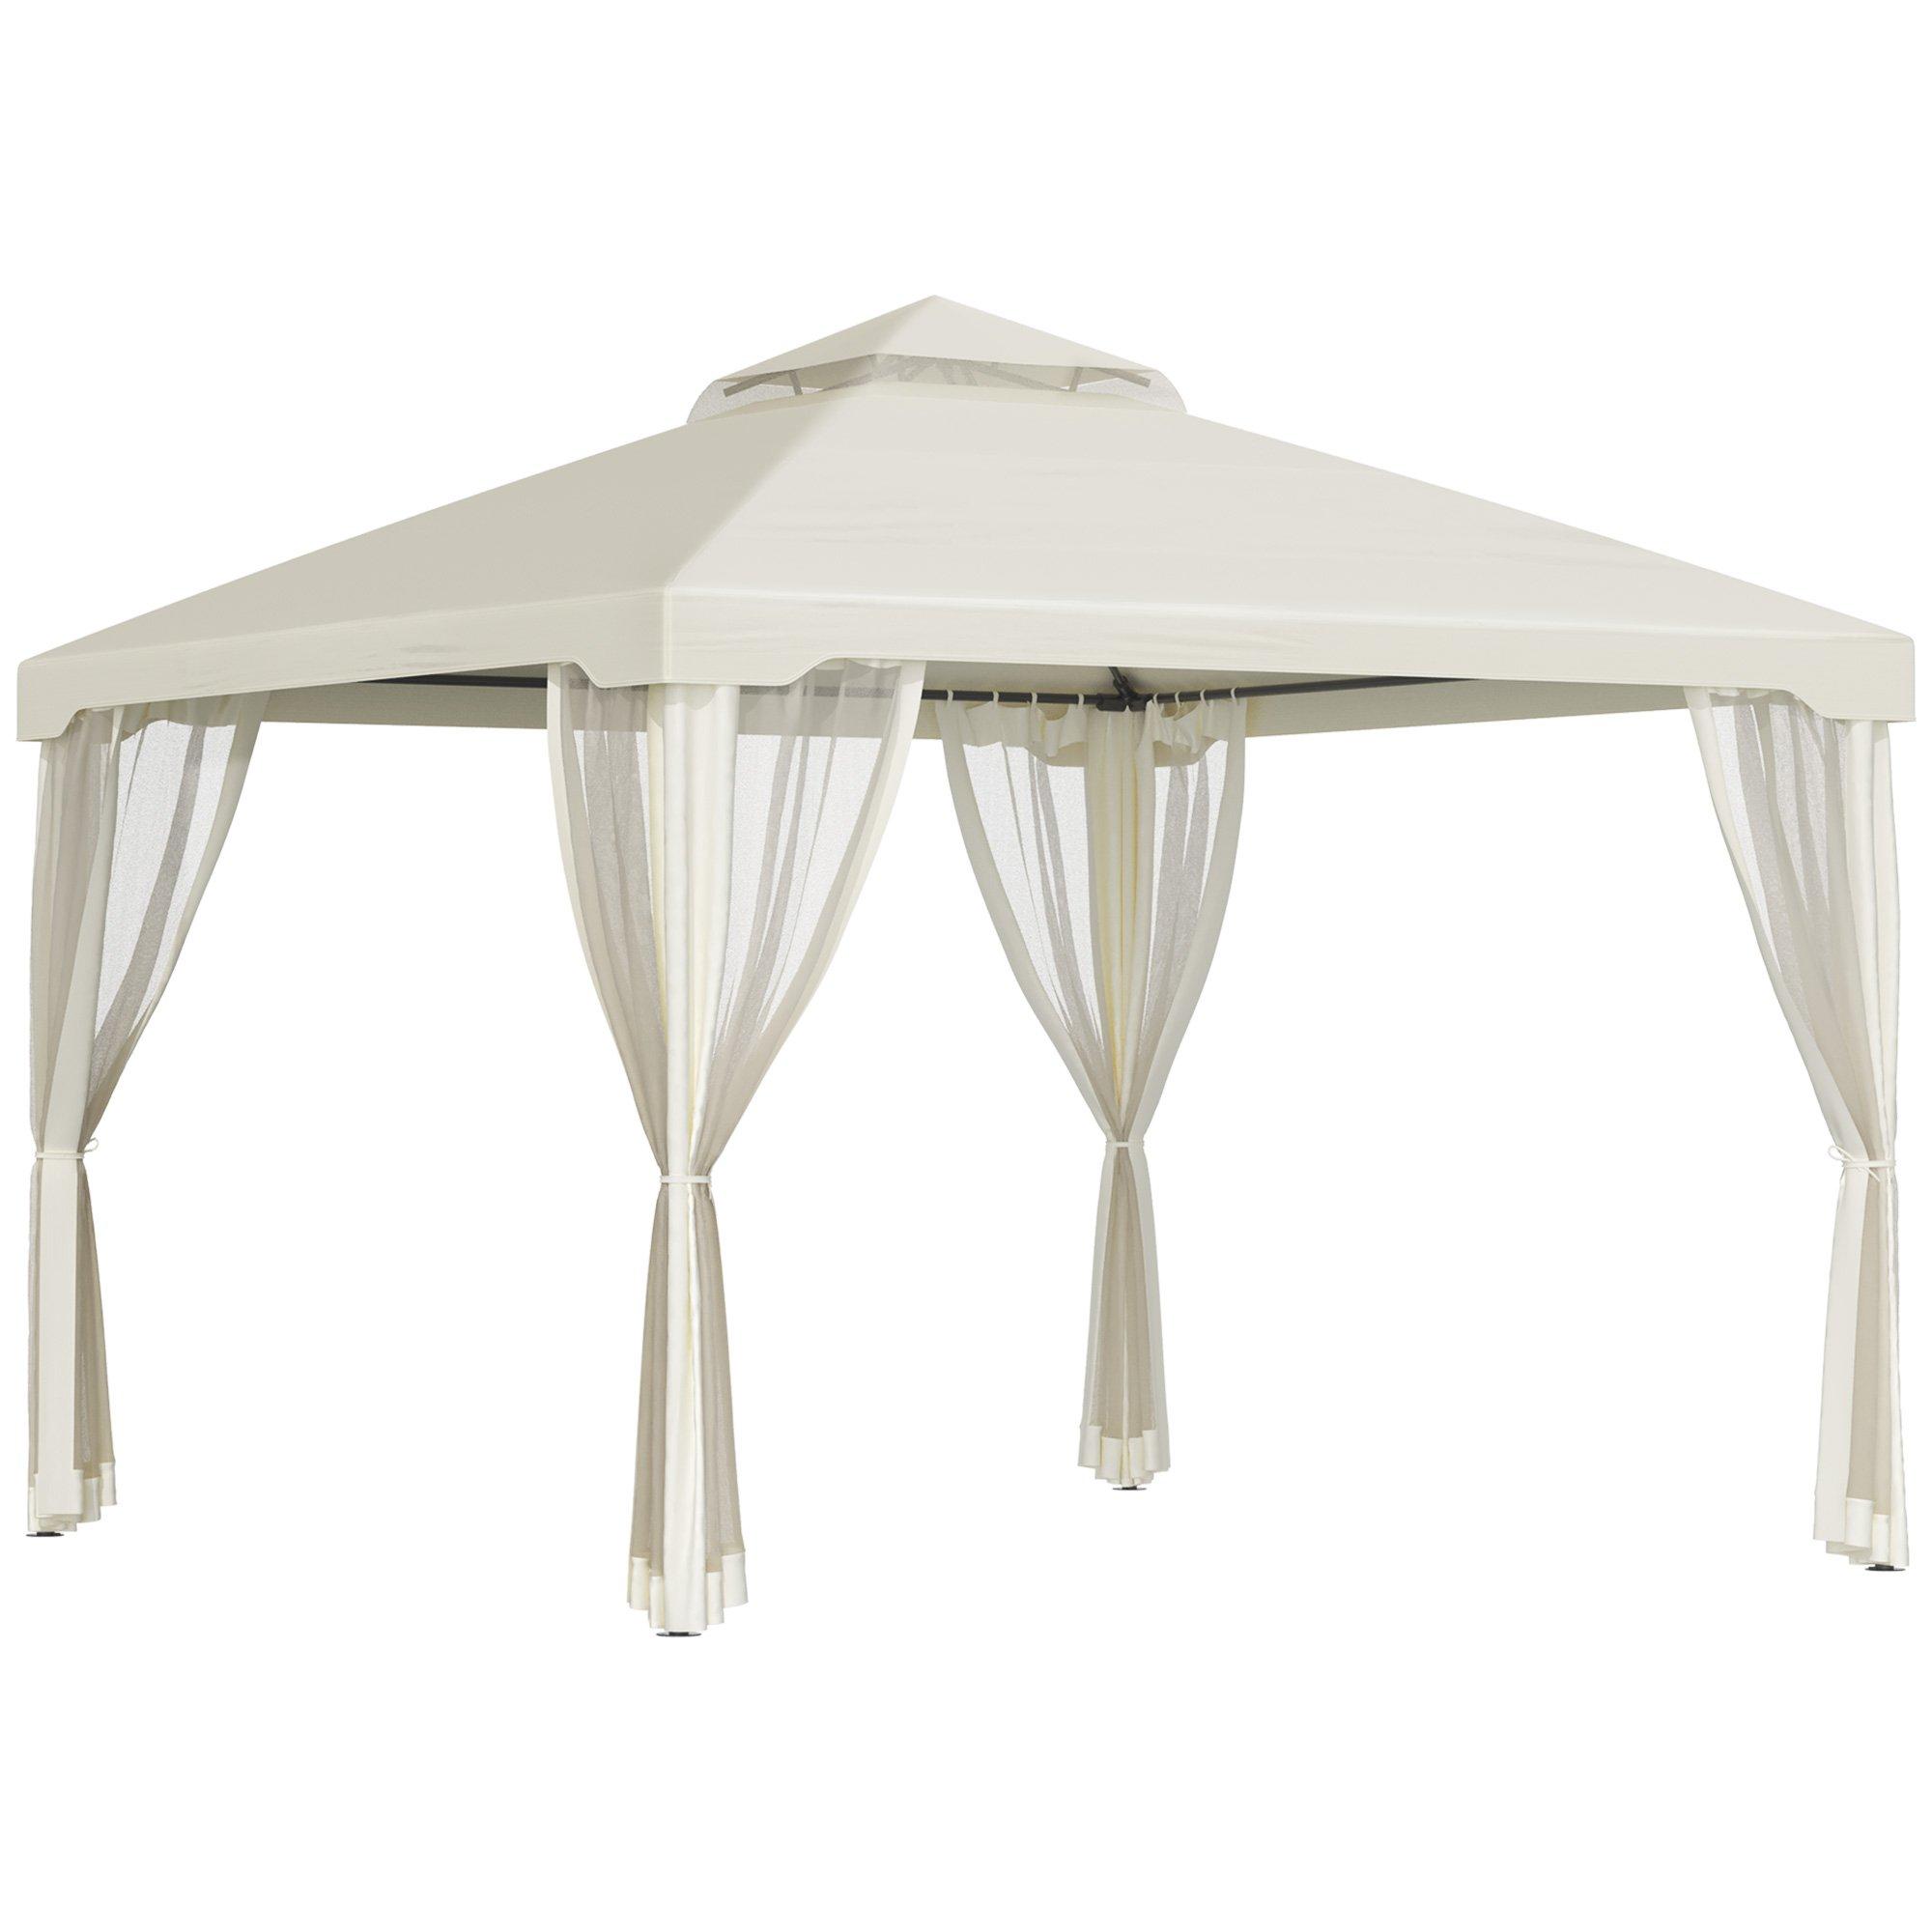 Outsunny 3 x 3 m Metal Gazebo Garden Outdoor 2-Tier Roof Marquee Party